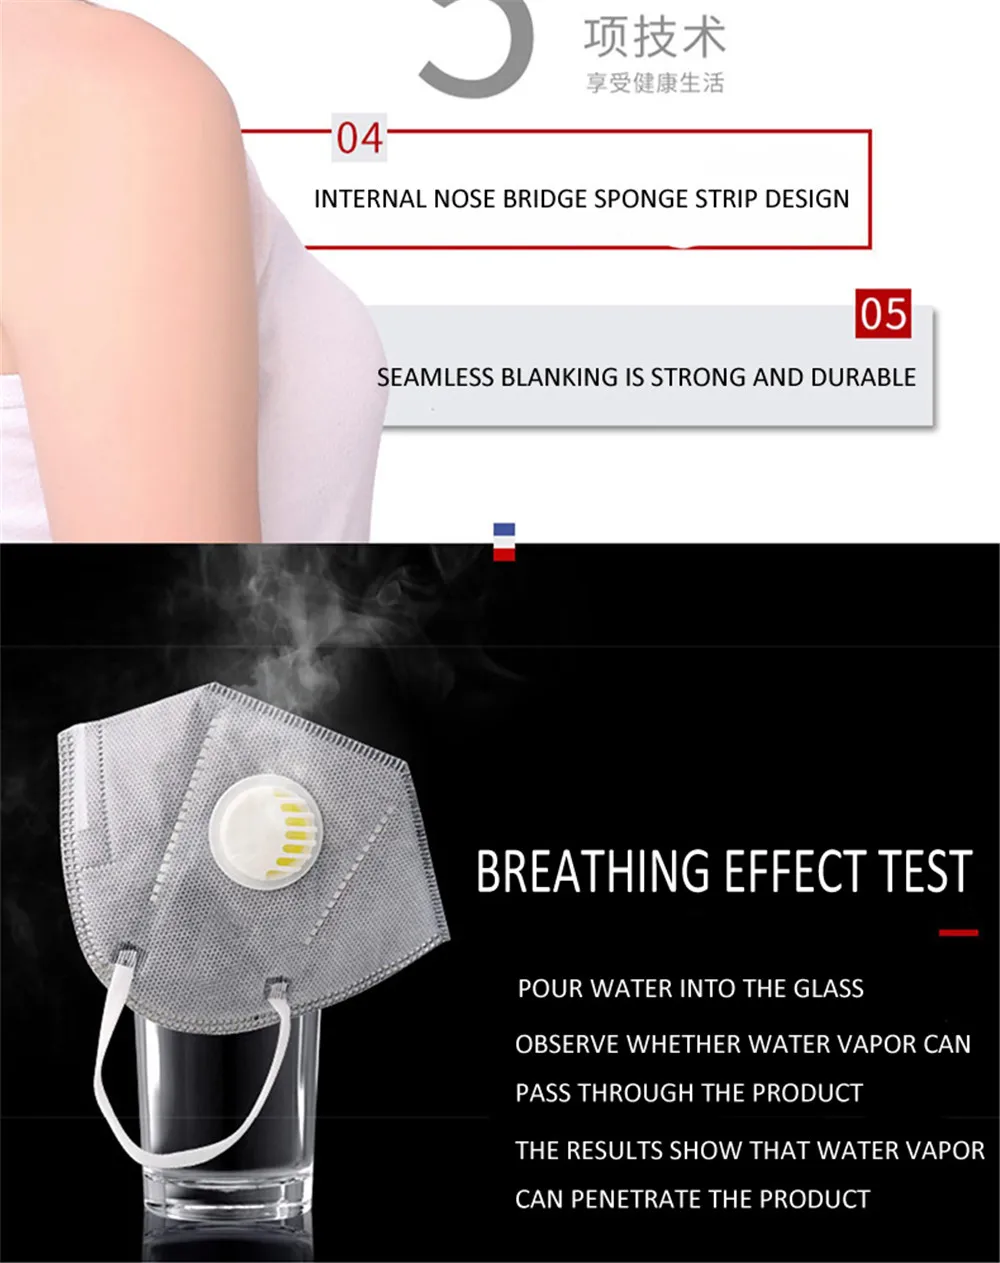 KN95 Valve Mask 5 Layer Flu Anti Infection N95 Face Mask 95% Breathable Respirator PM2.5 n95 face mask mouth cover KN95 Masks